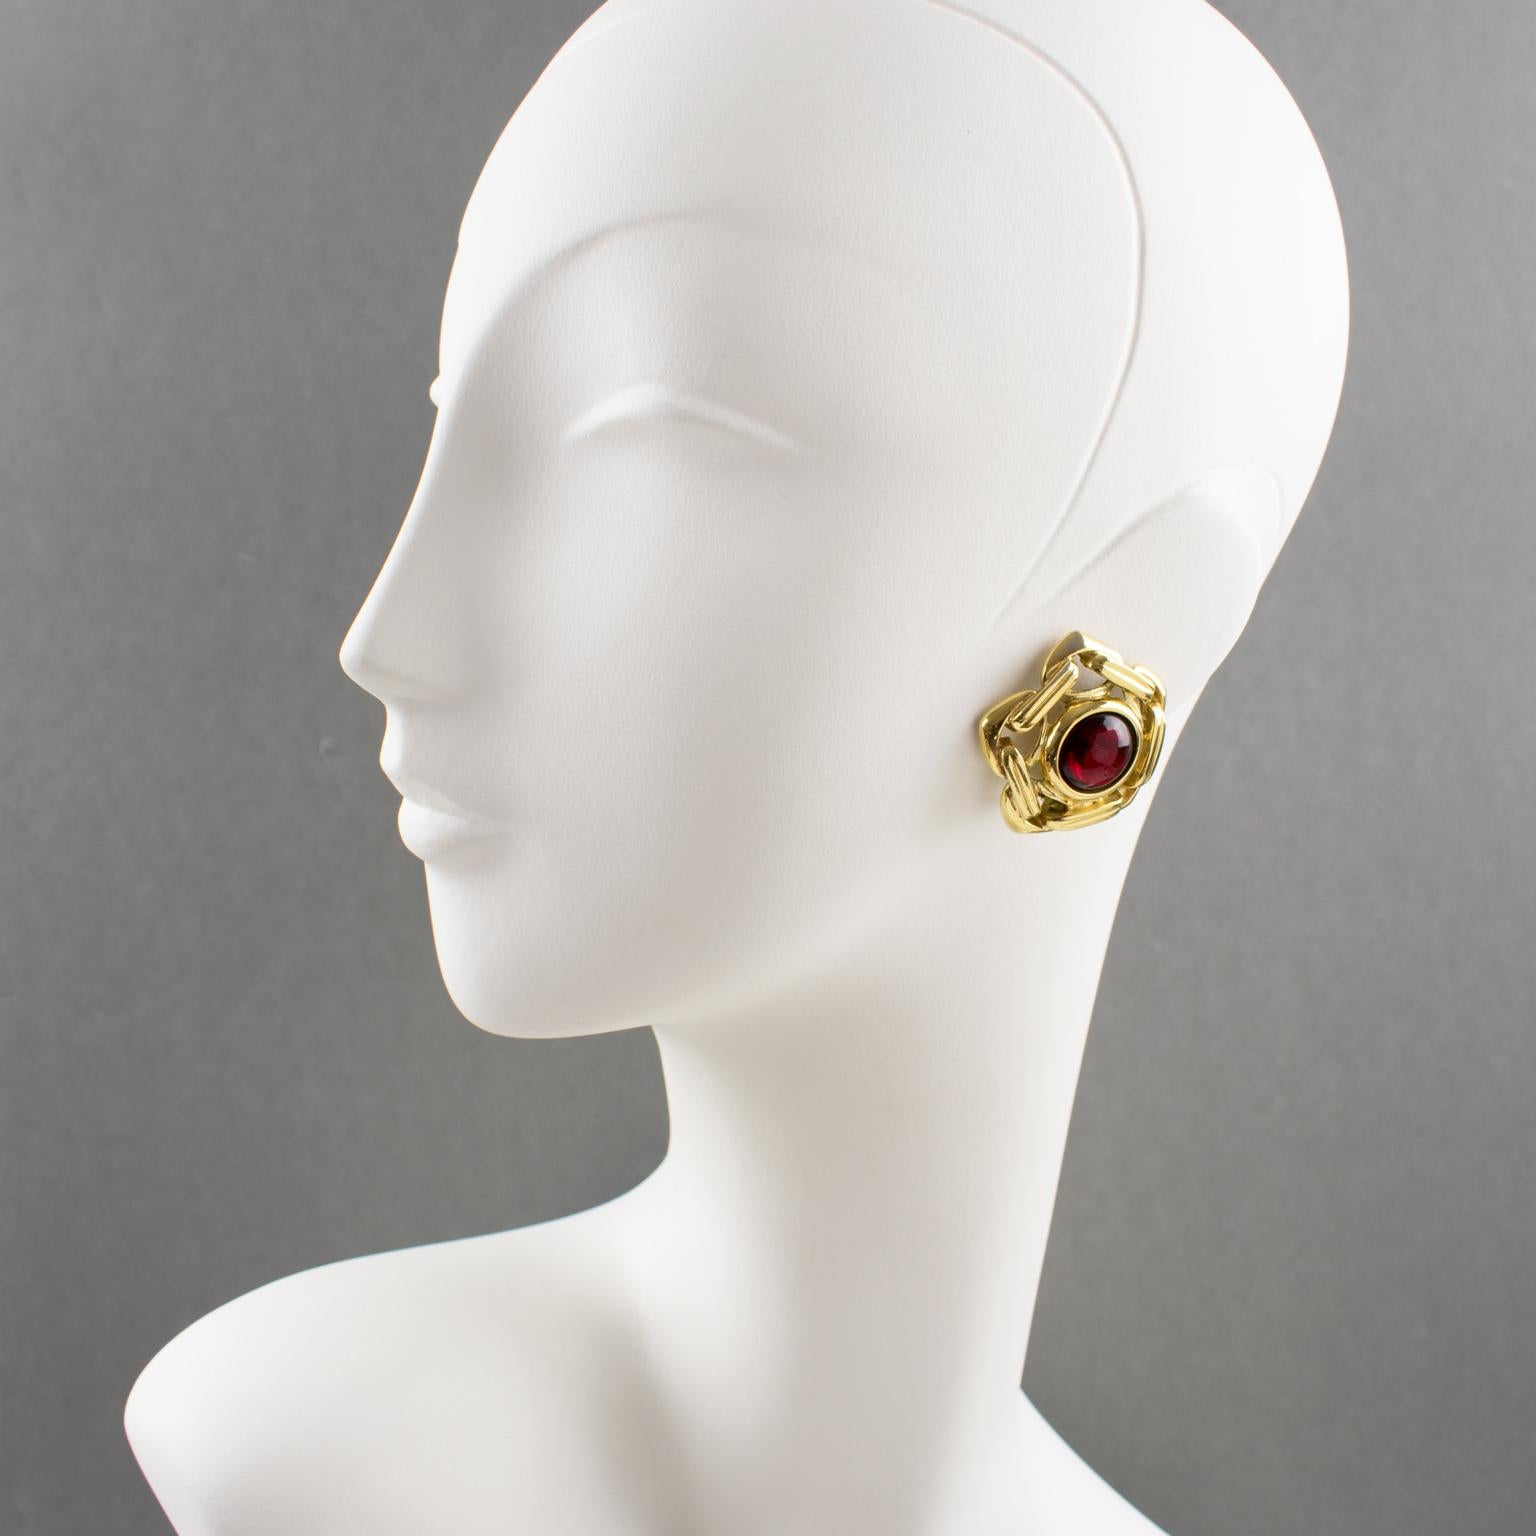 Beautiful Yves Saint Laurent YSL Paris clip-on earrings. Gilt metal hexagonal dimensional shape, metal all textured and see-thru featuring large chain compliment with ruby red resin cabochon rhinestone. Signed at the back with pierced 'YSL' logo on